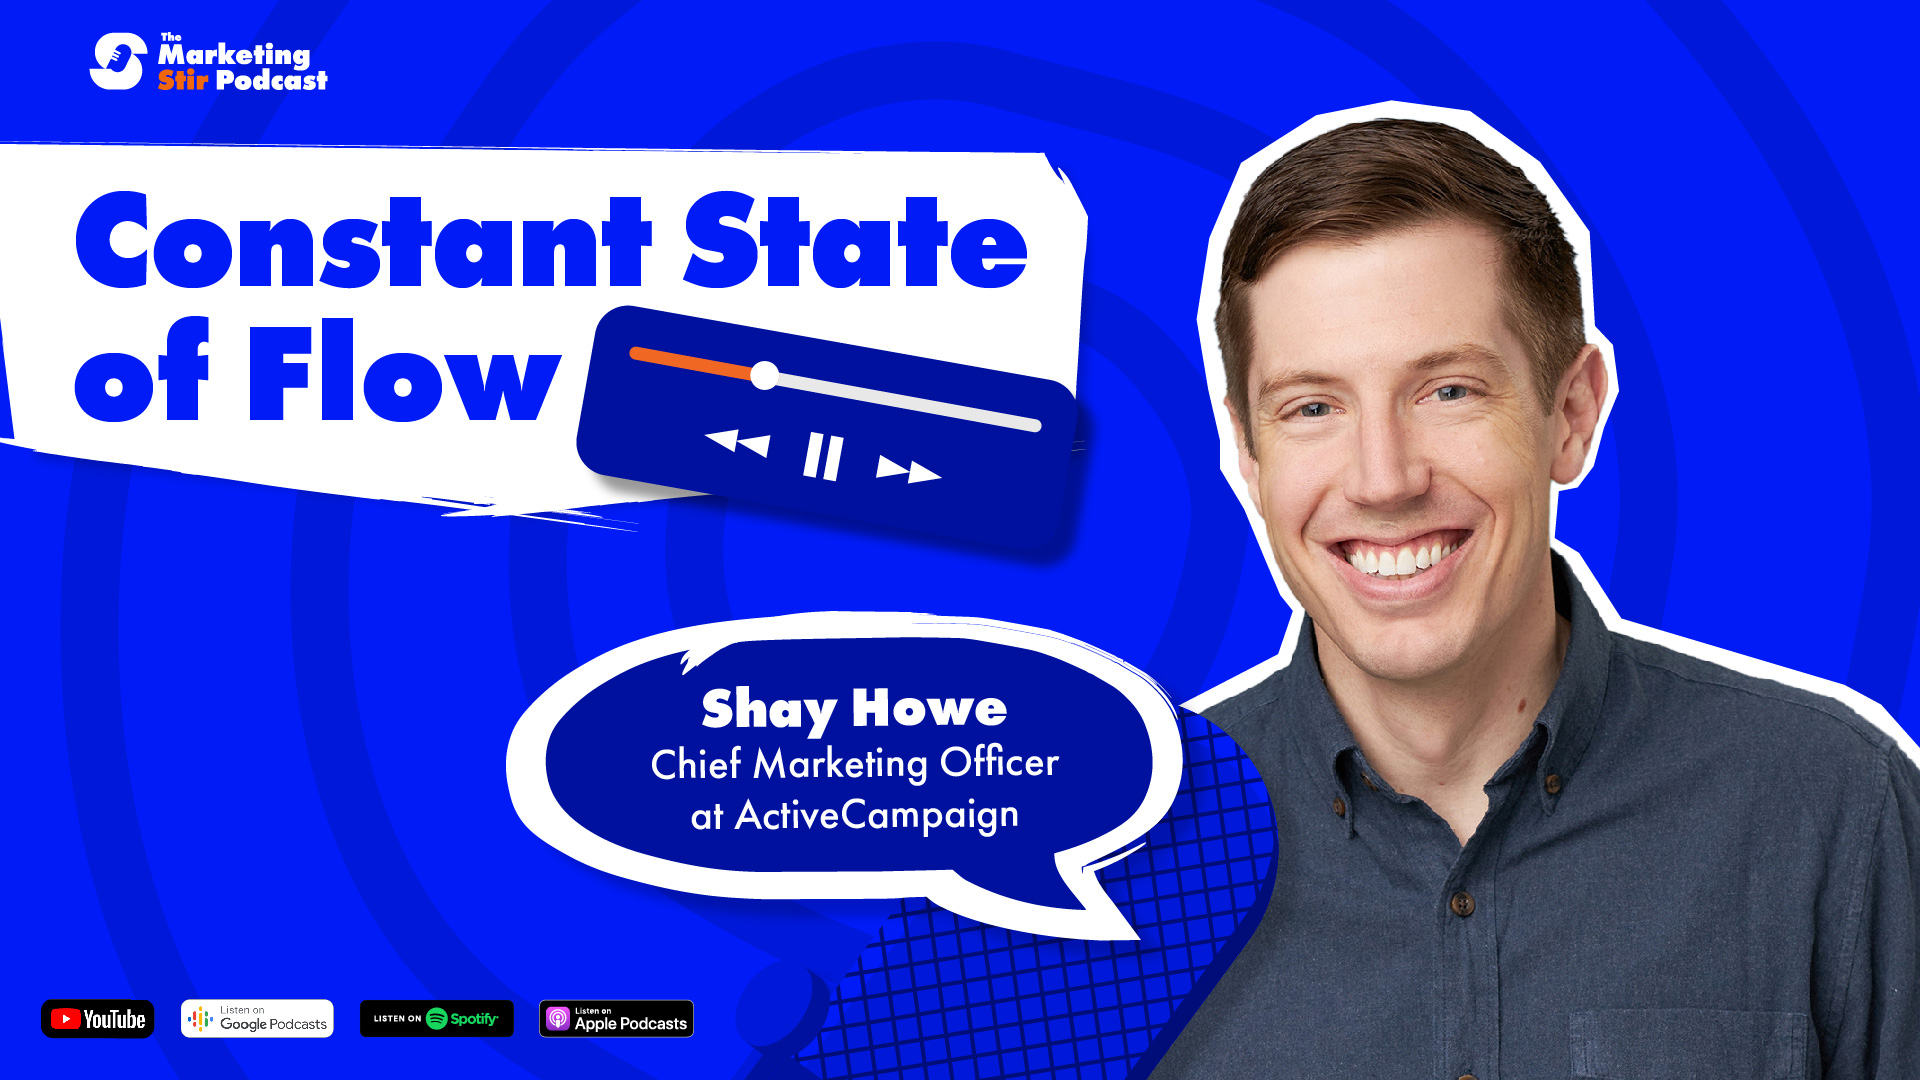 Shay Howe (ActiveCampaign) - Constant State of Flow